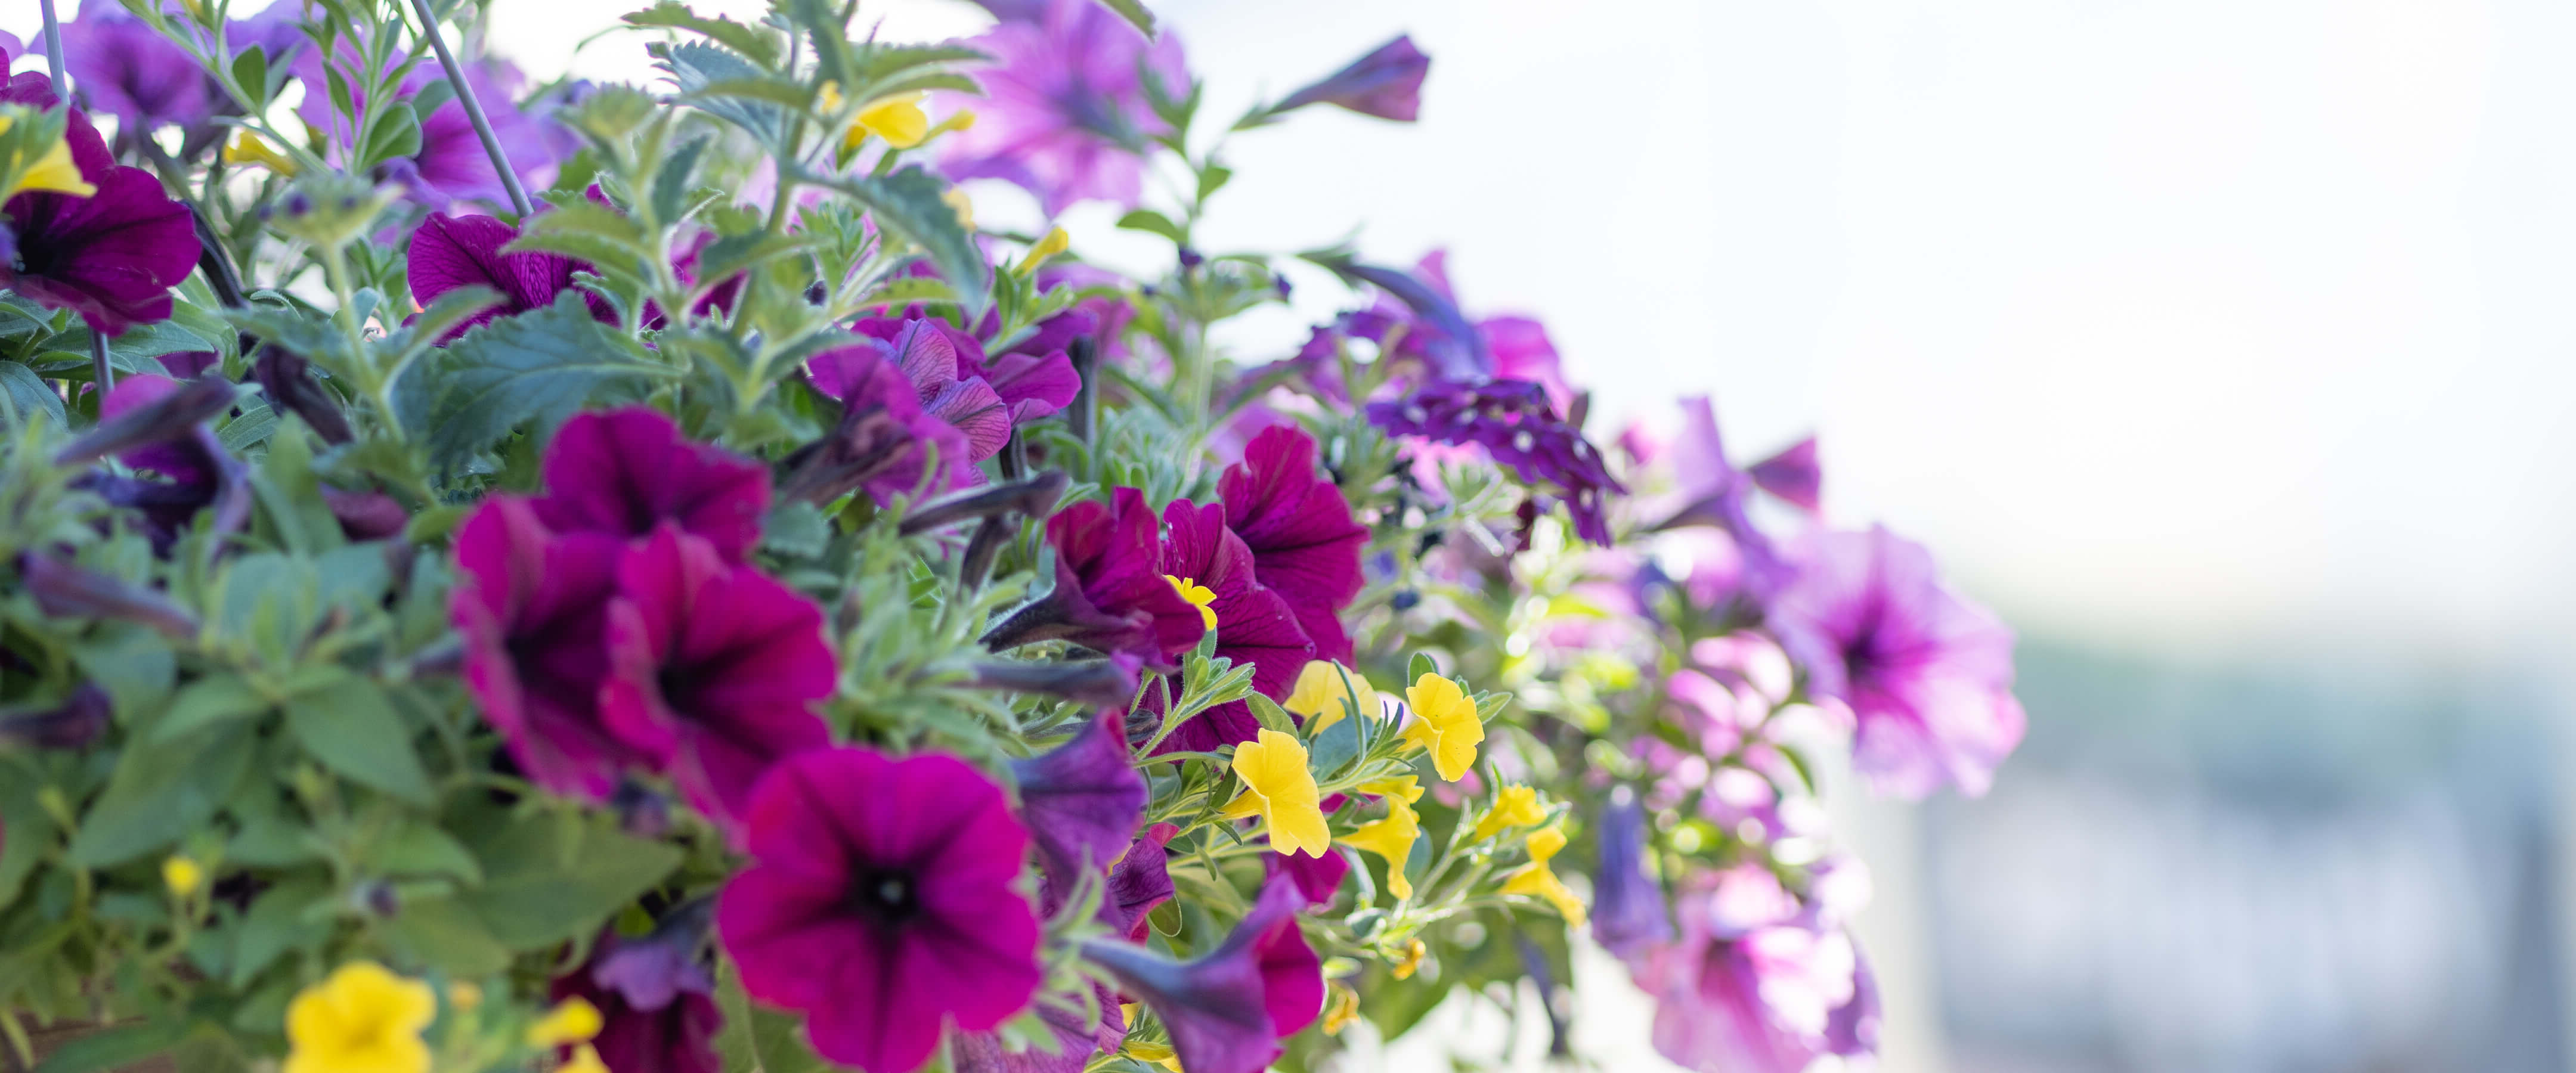 Fall flowers - purple petunias and yellow flowers at SummerWinds Nursery.